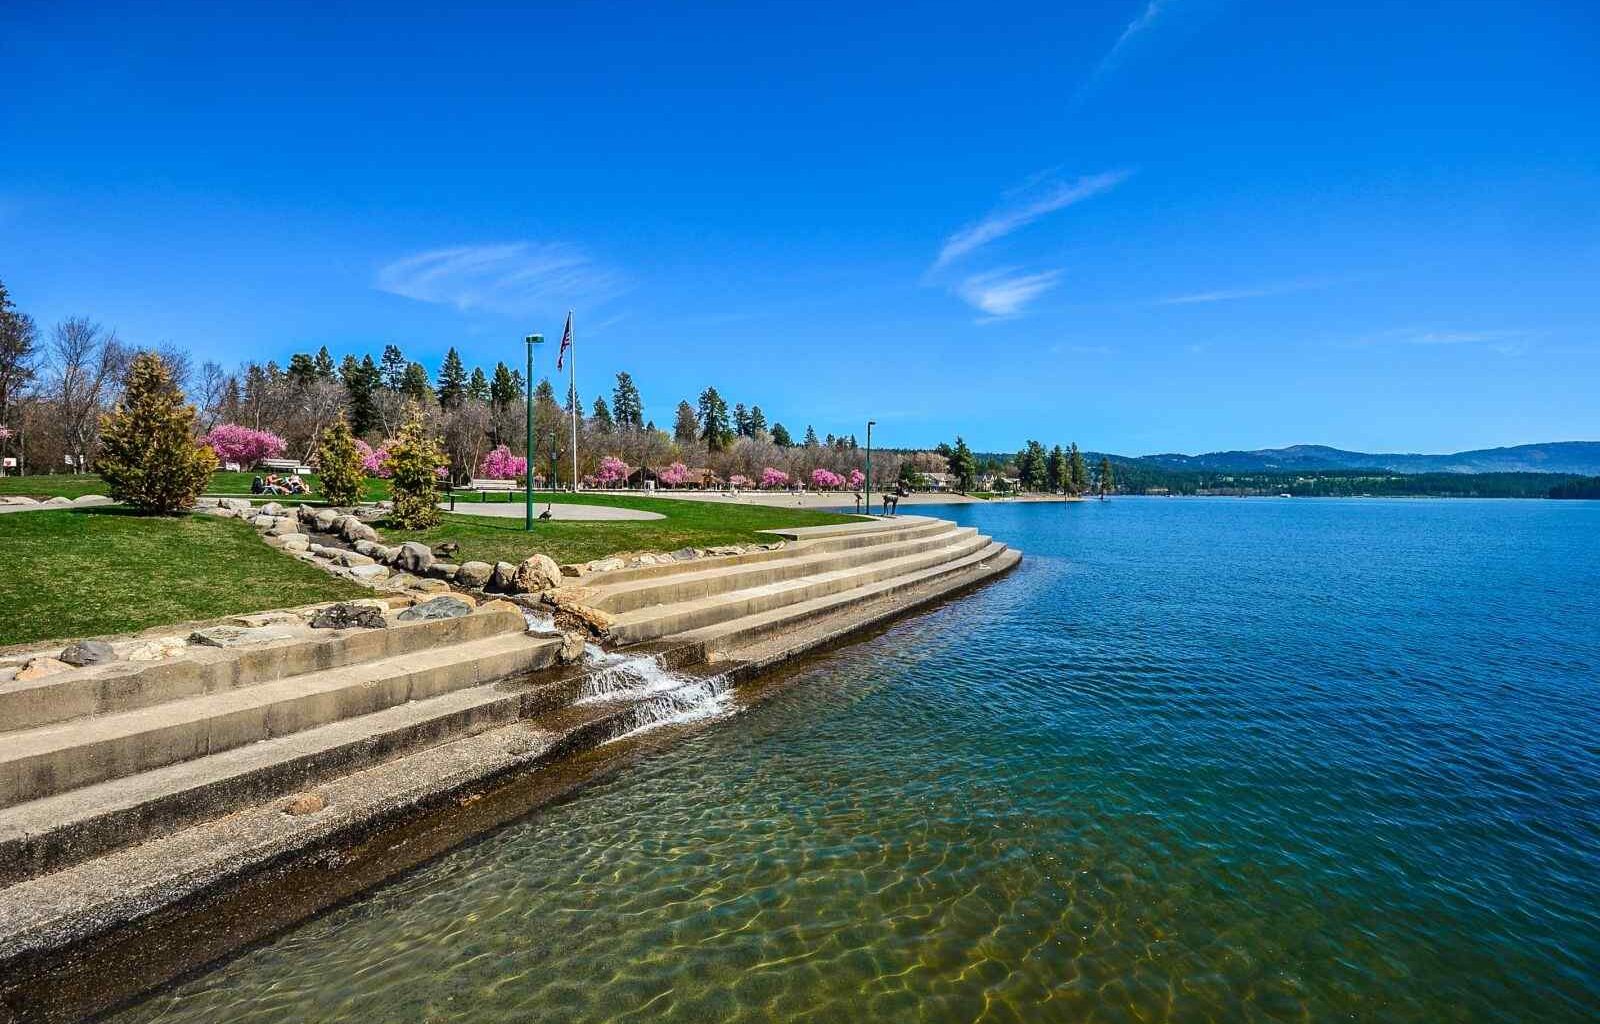 Things to Do in Coeur d'Alene